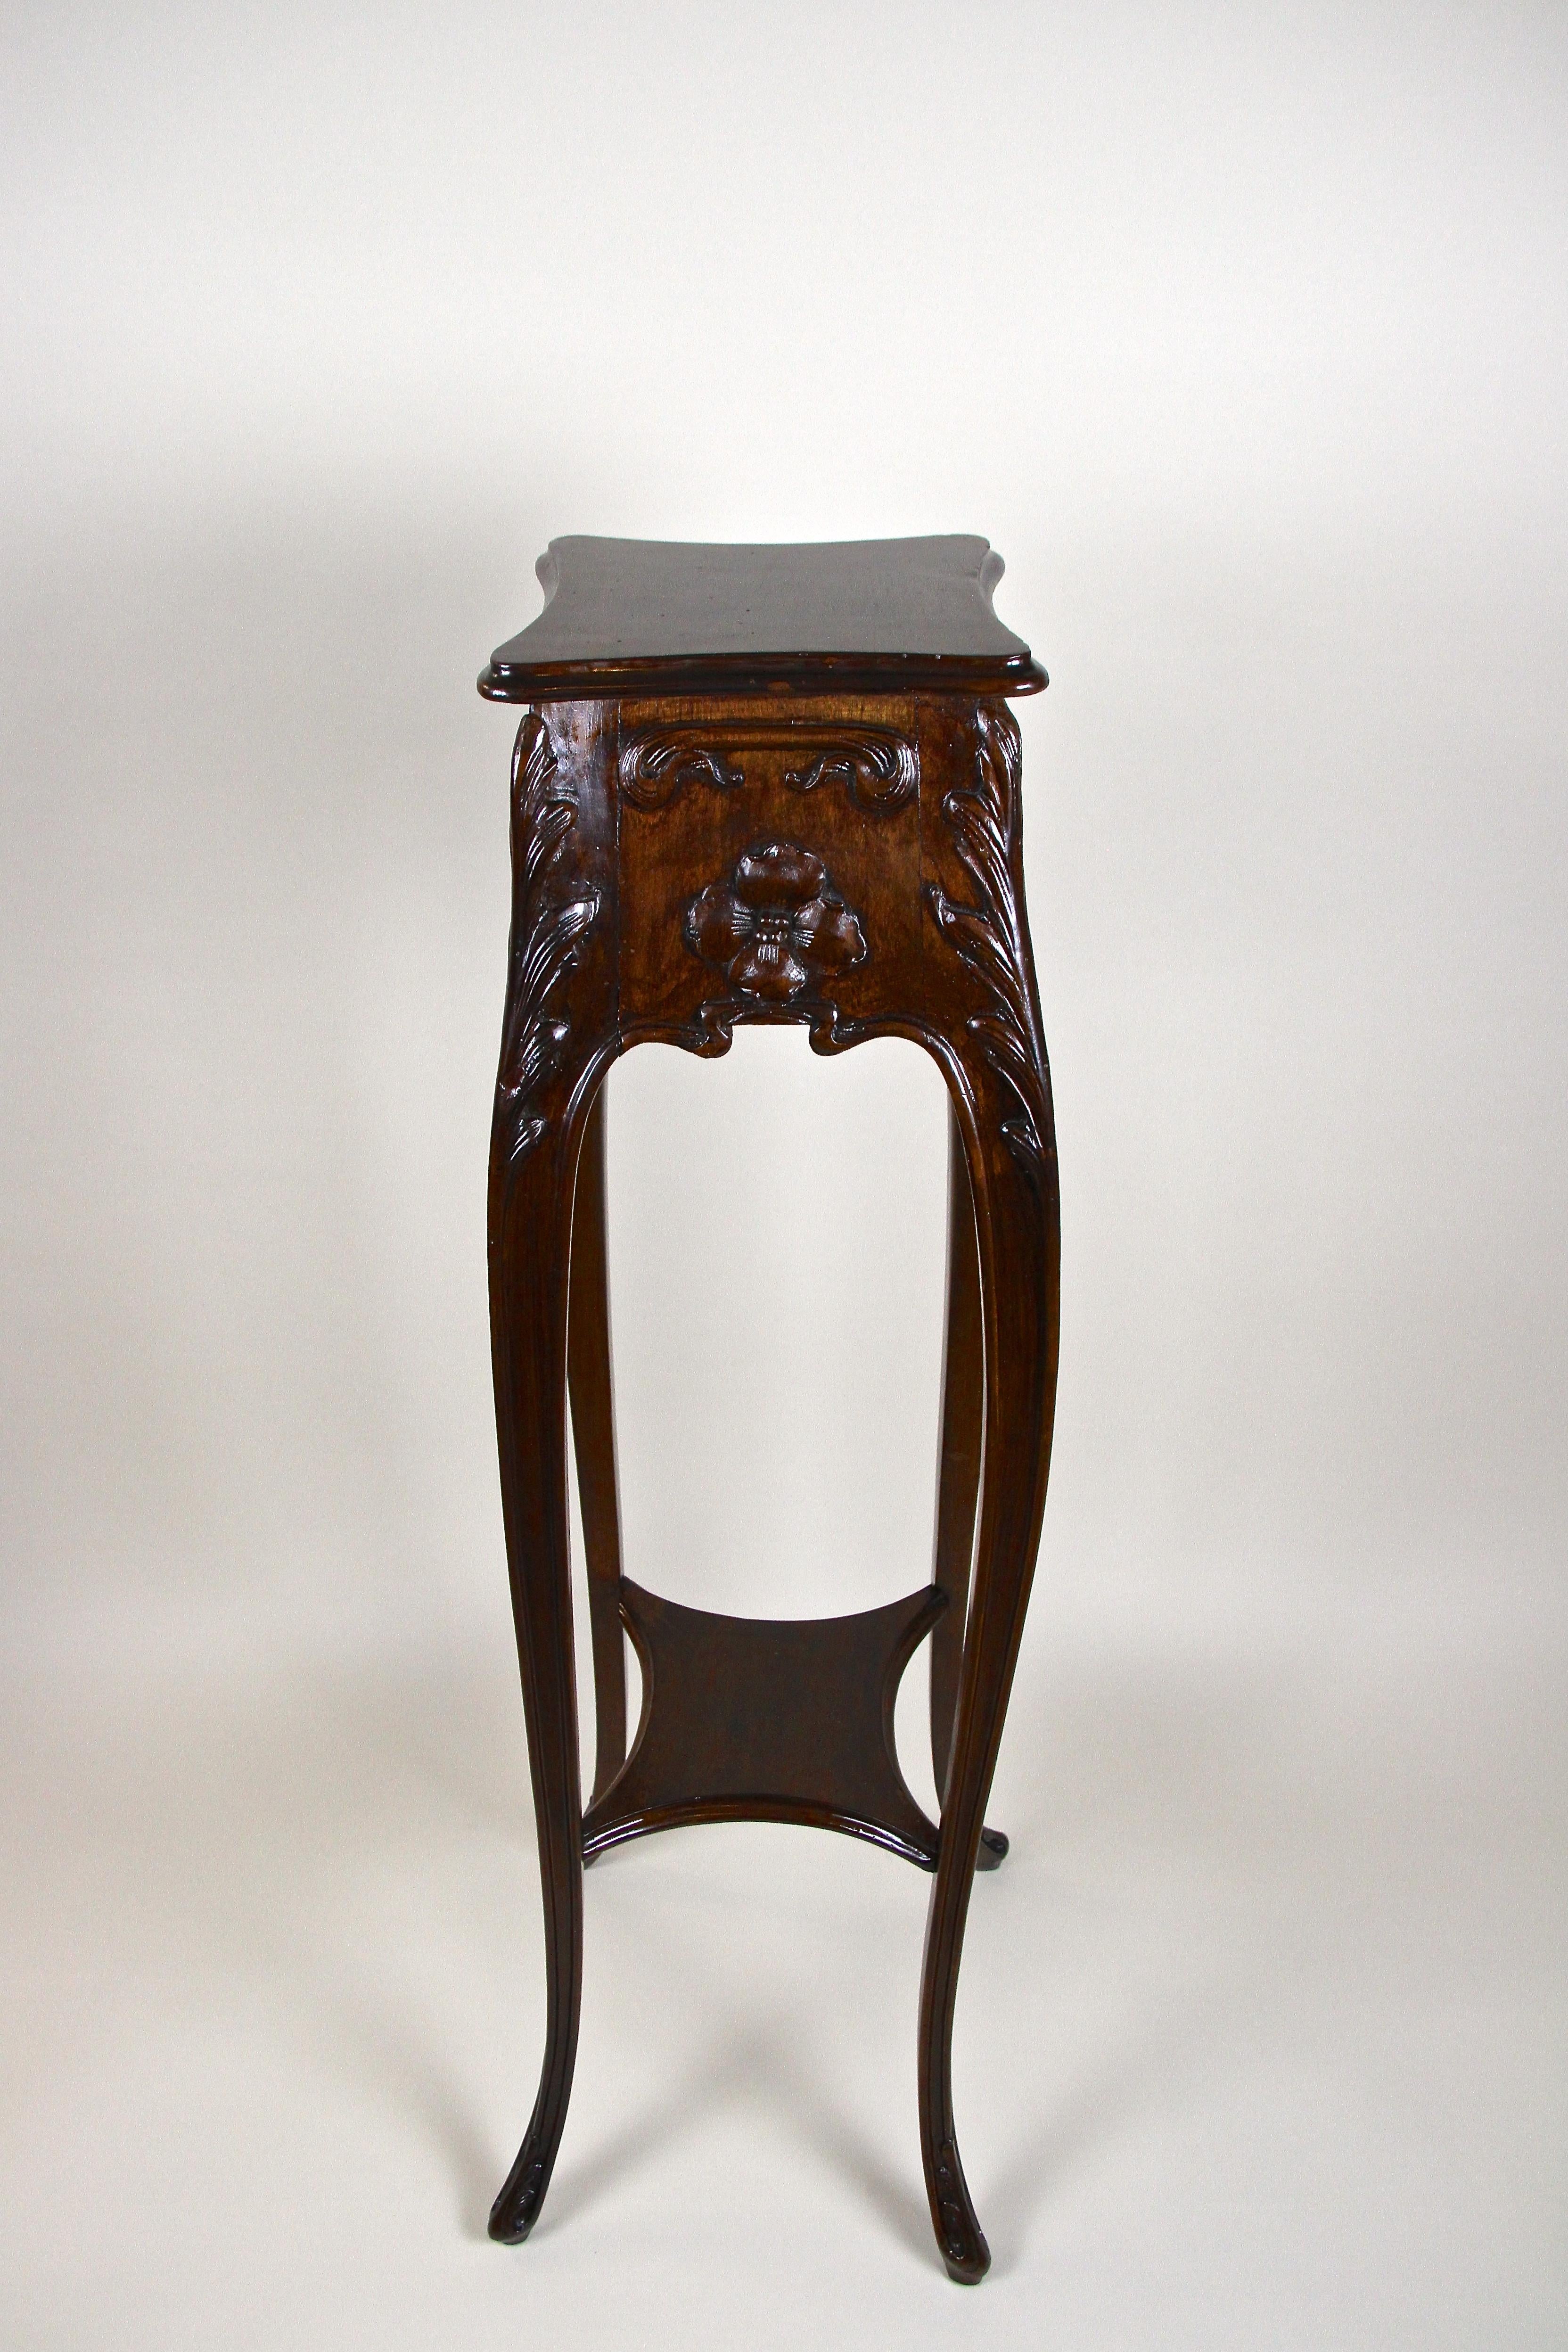 Hand-Carved Art Nouveau Nutwood Pedestal with Floral Carvings, Austria, circa 1900